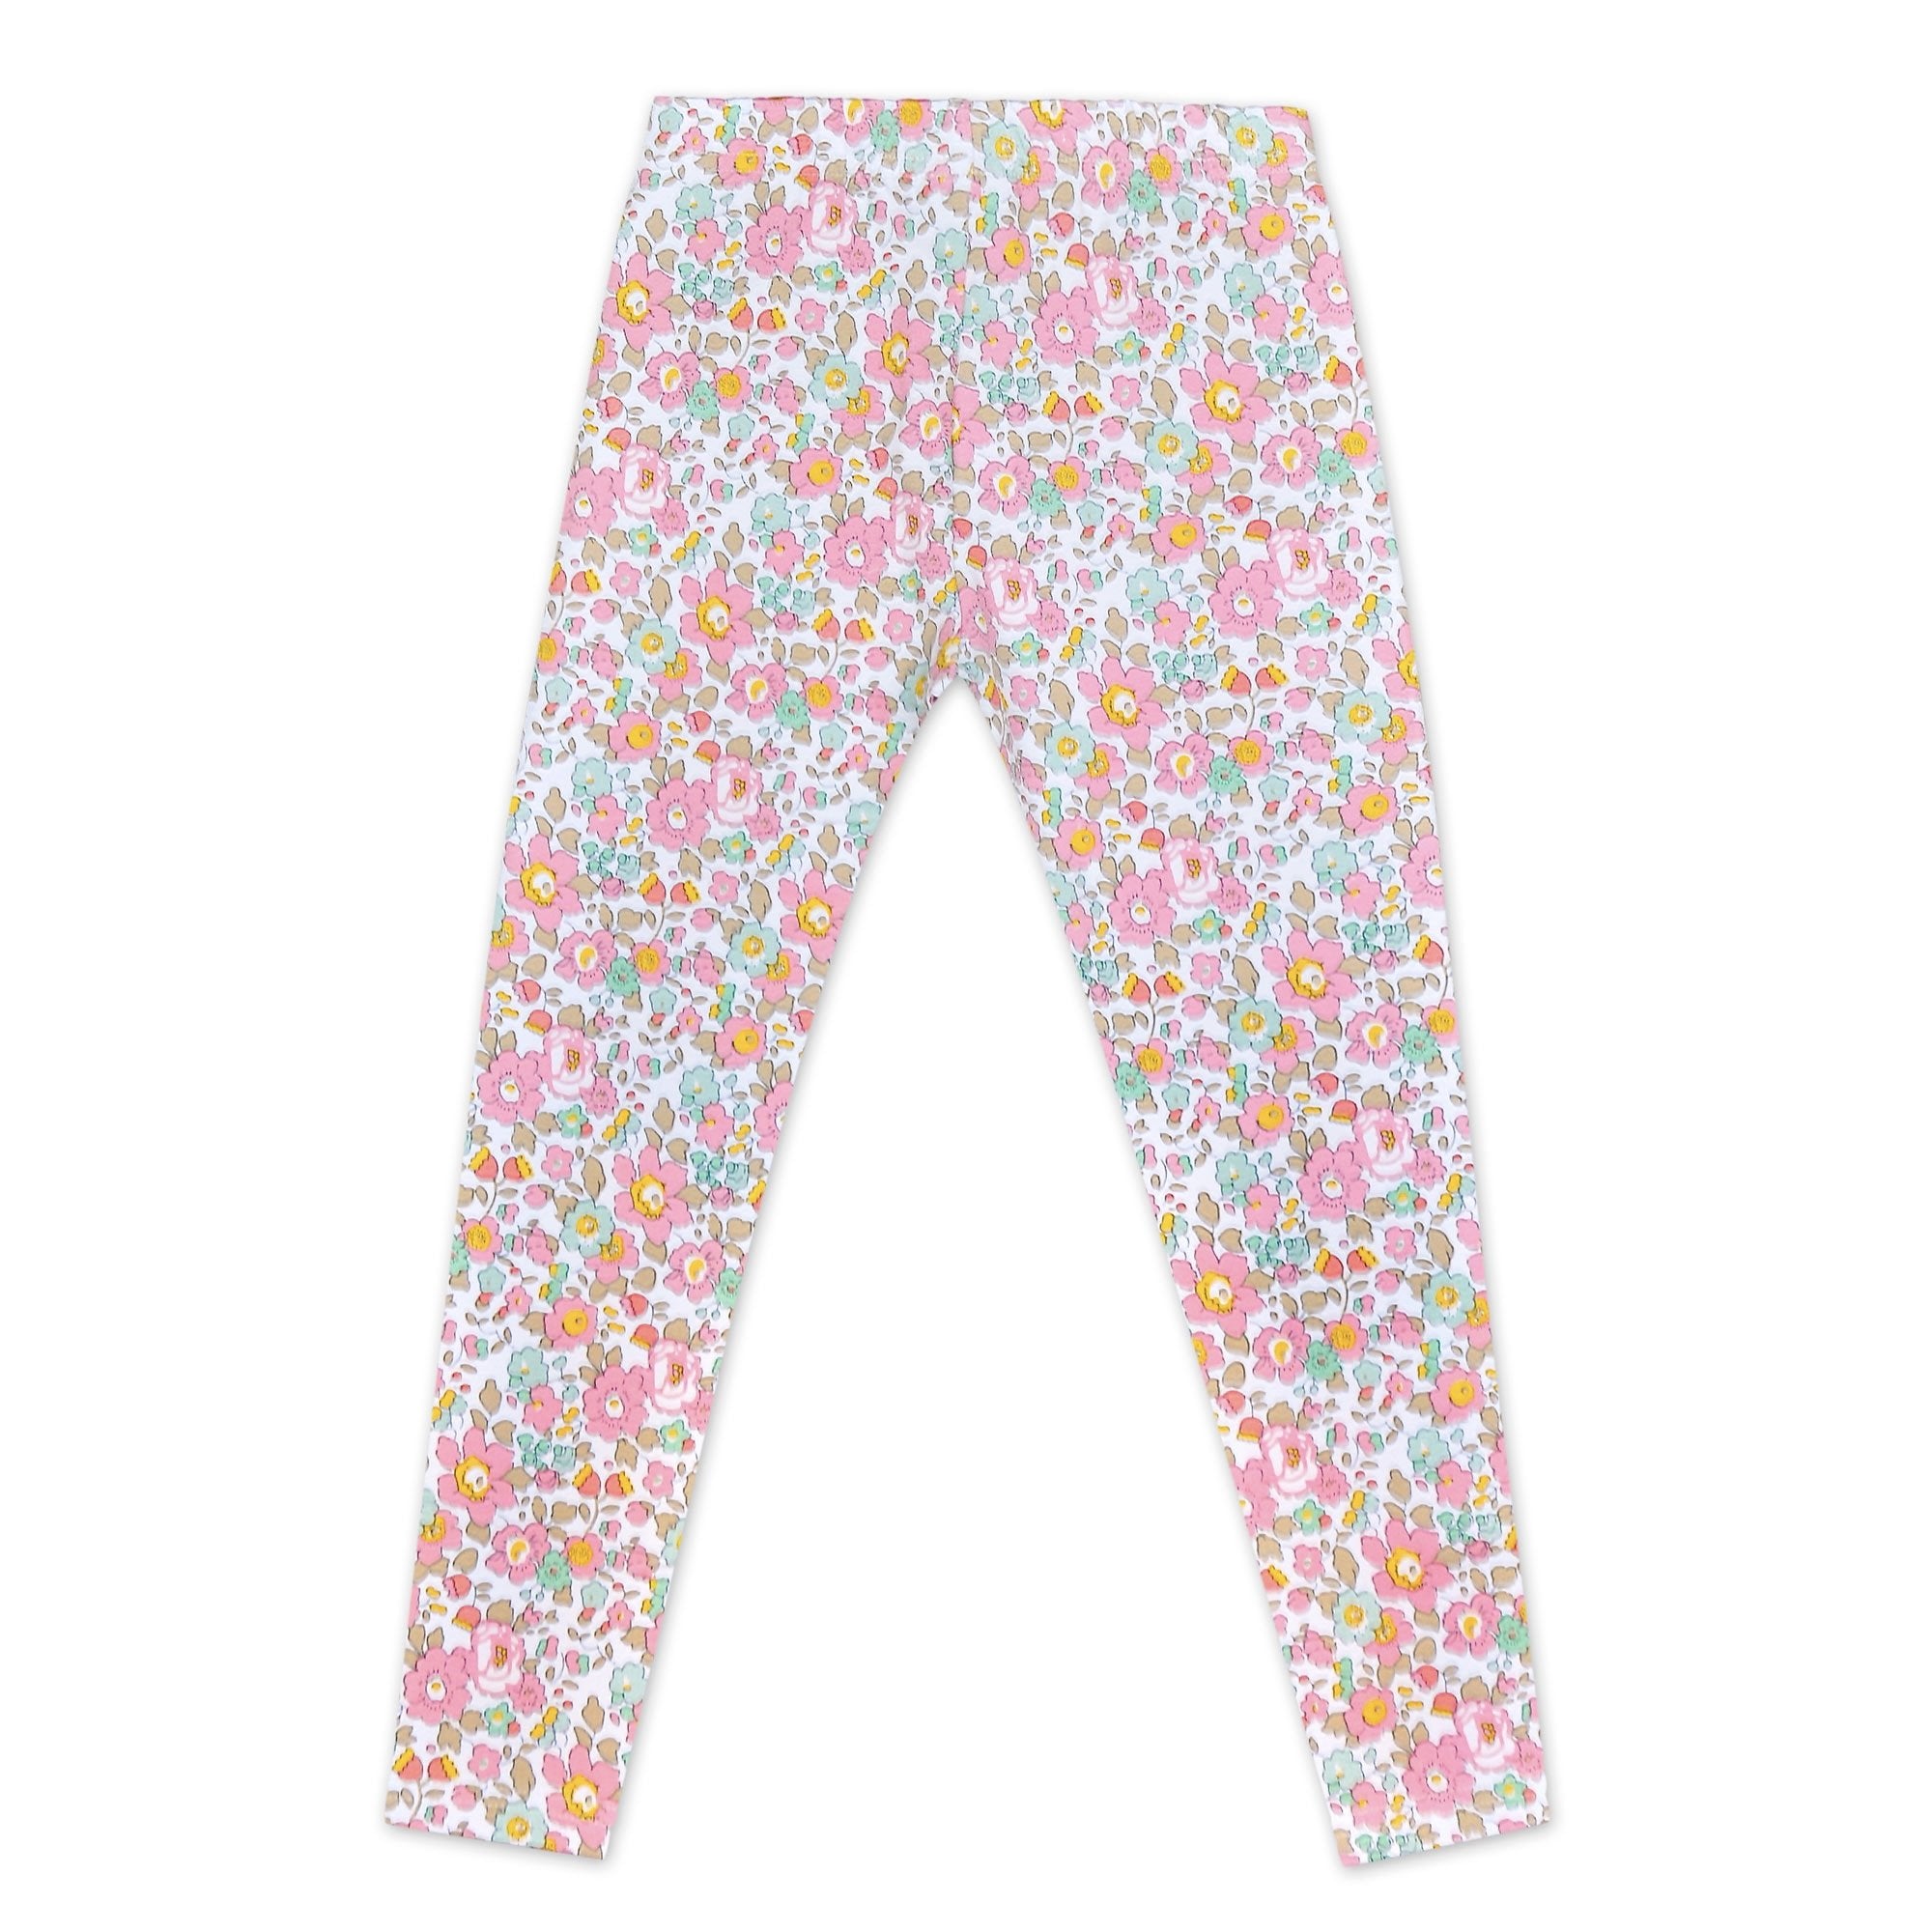 Bessie Pink Liberty Print Leggings - Cou Cou Baby